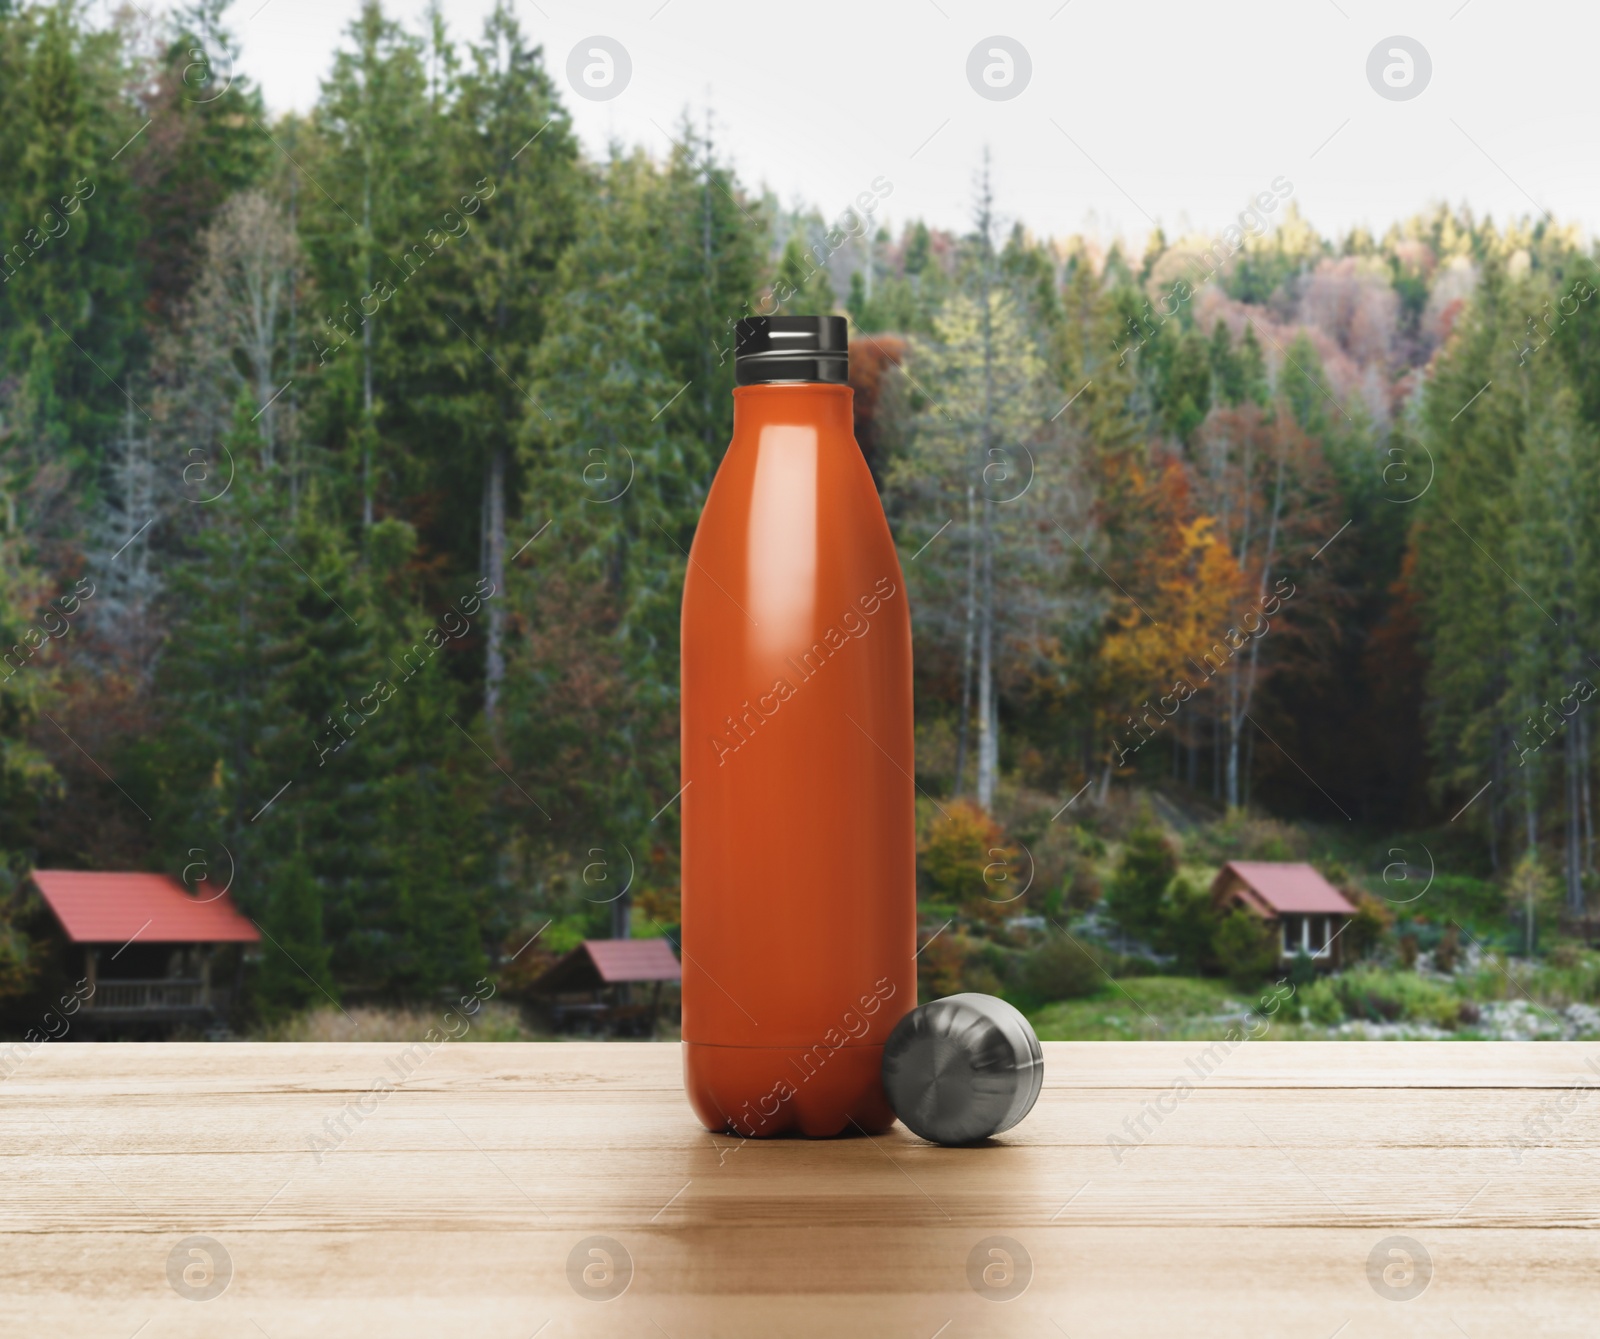 Image of Orange thermos bottle on wooden table against mountain landscape